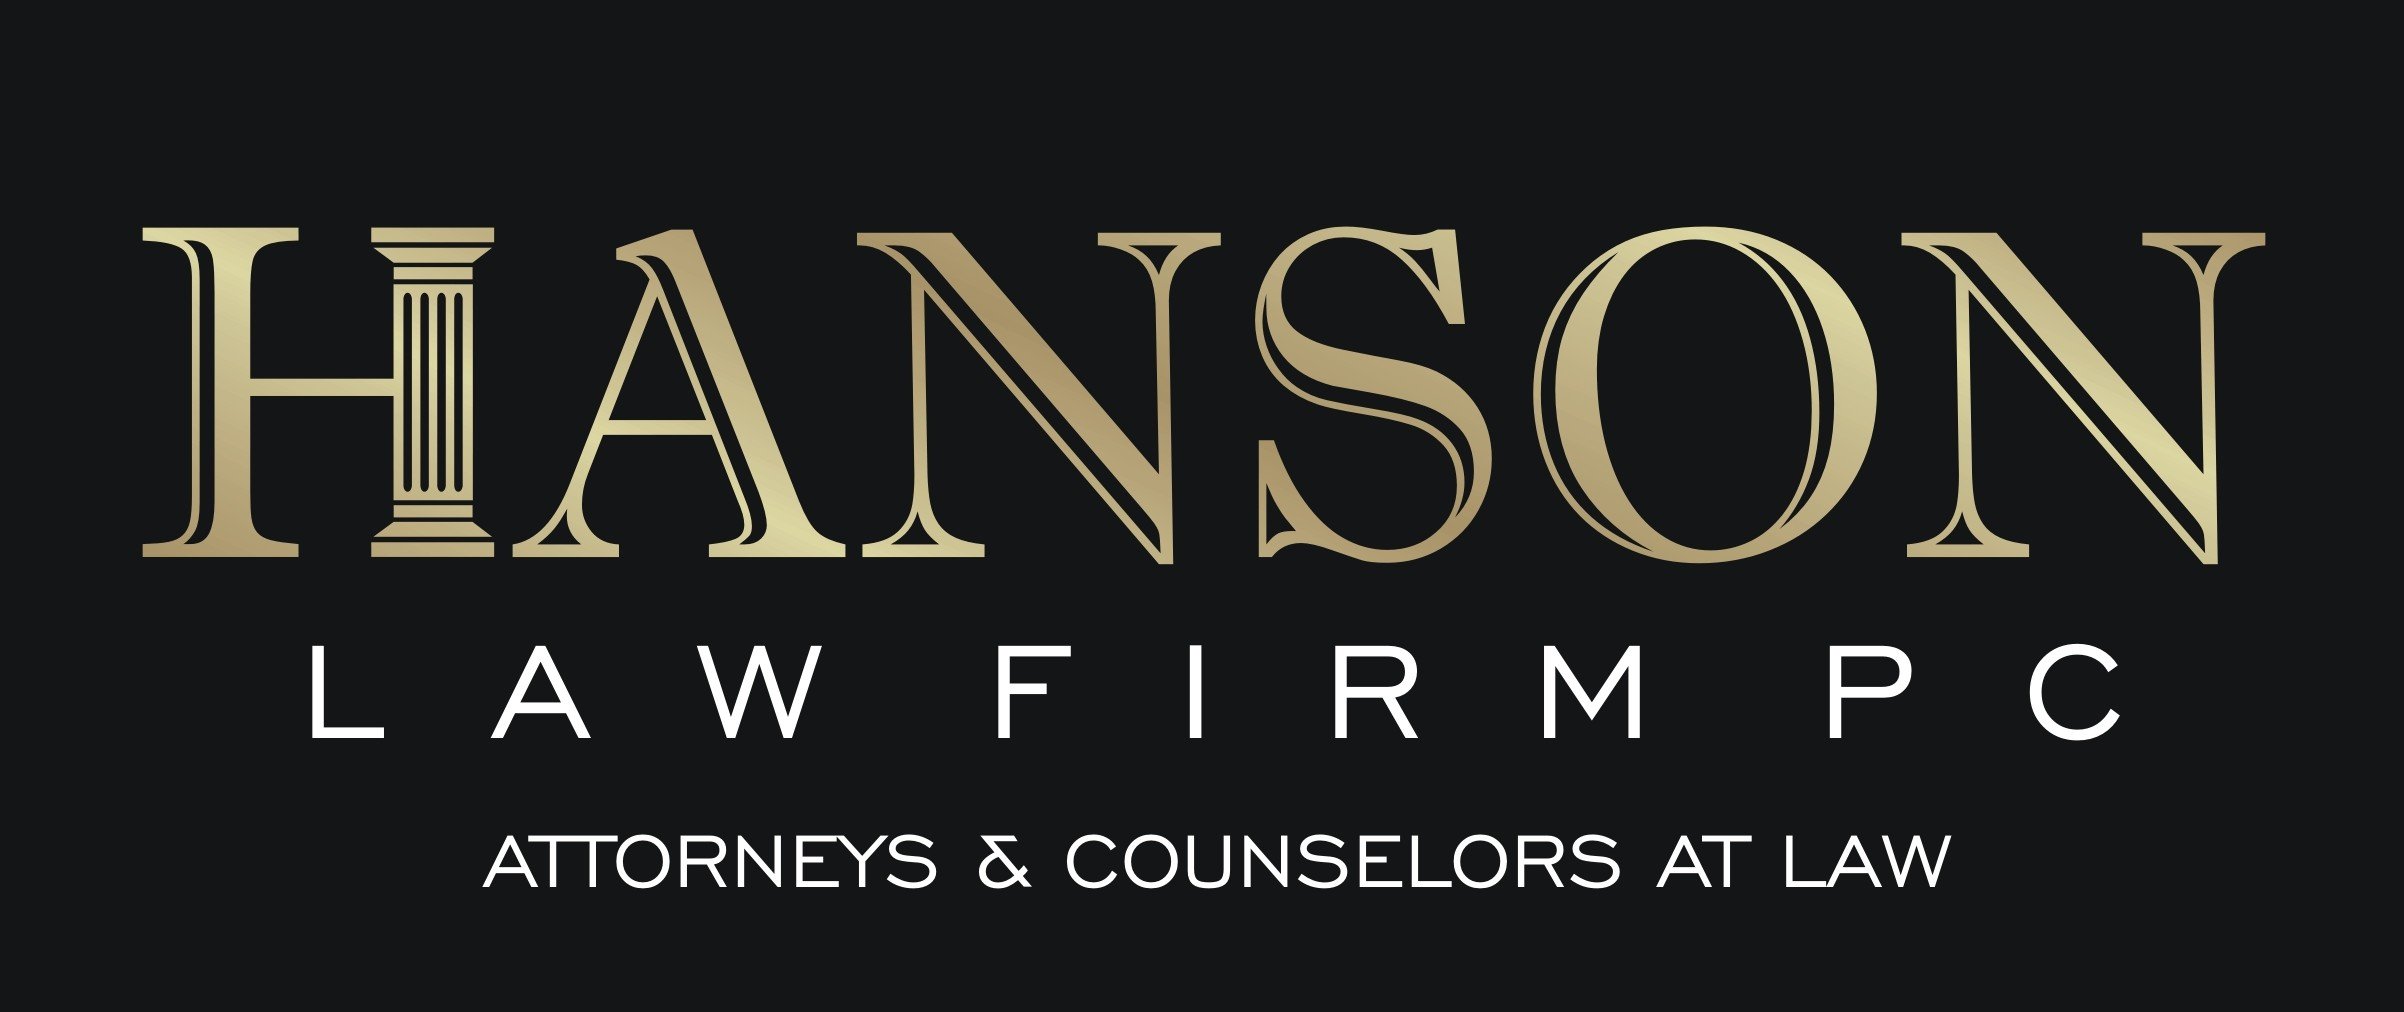 Hanson Law Firm PC attorneys & counselors at law